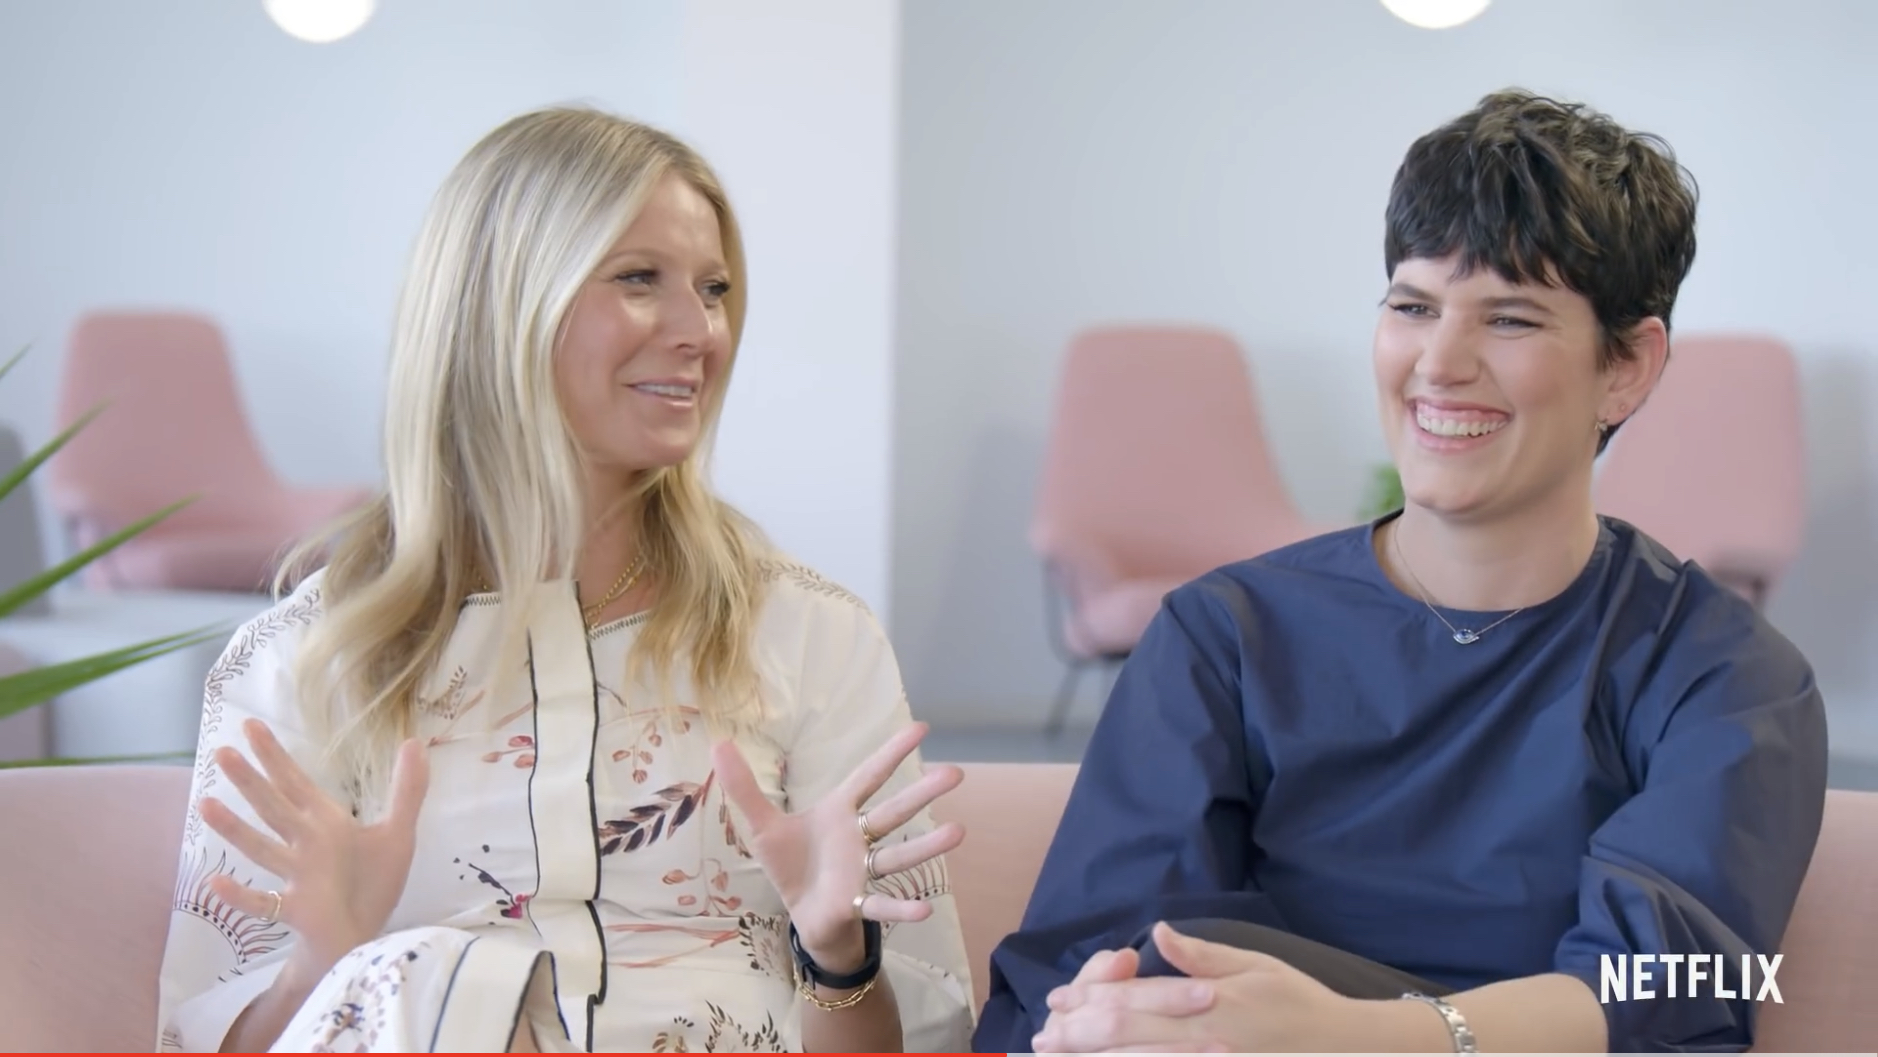 Gwyneth Paltrow and a colleague appear in their Goop-themed Netflix show